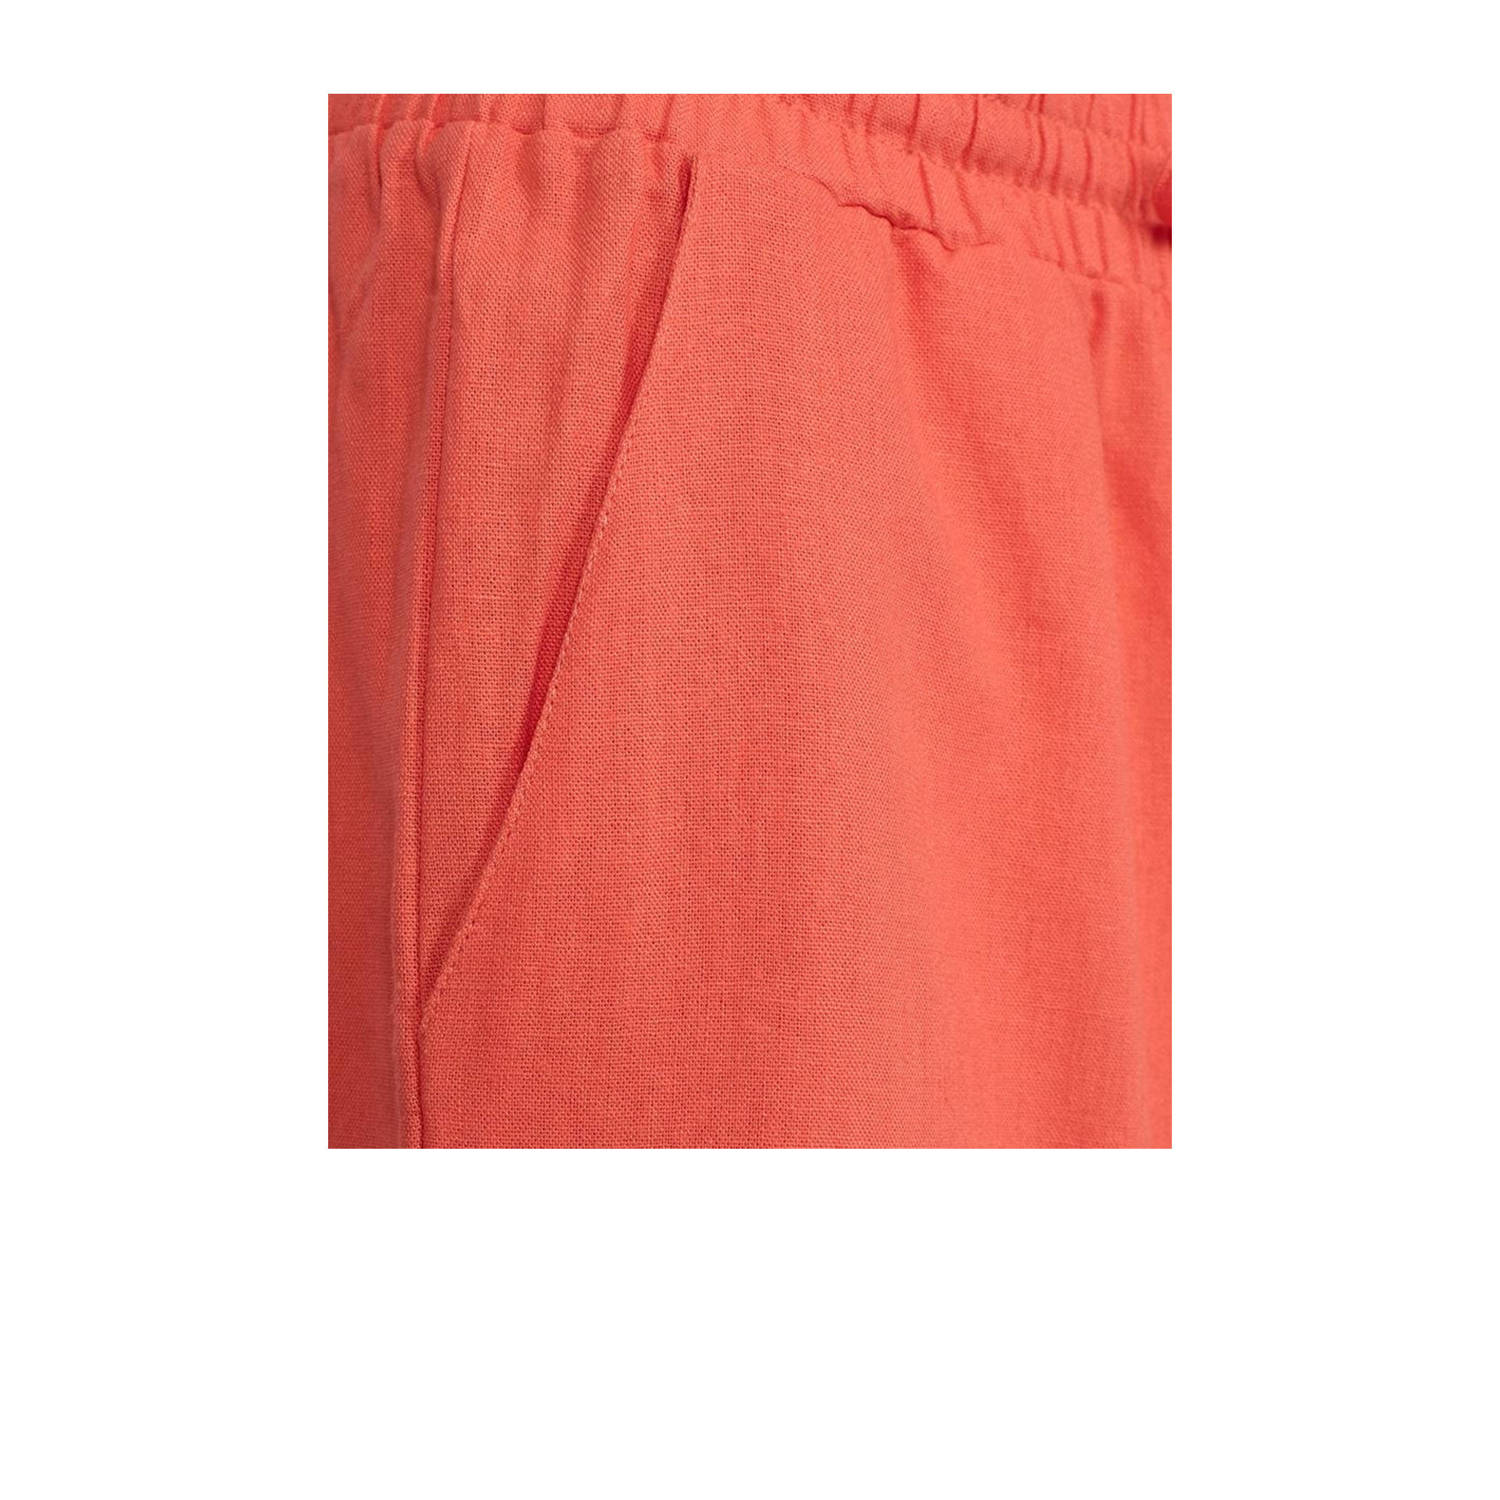 FREEQUENT cropped high waist loose fit culotte hot coral